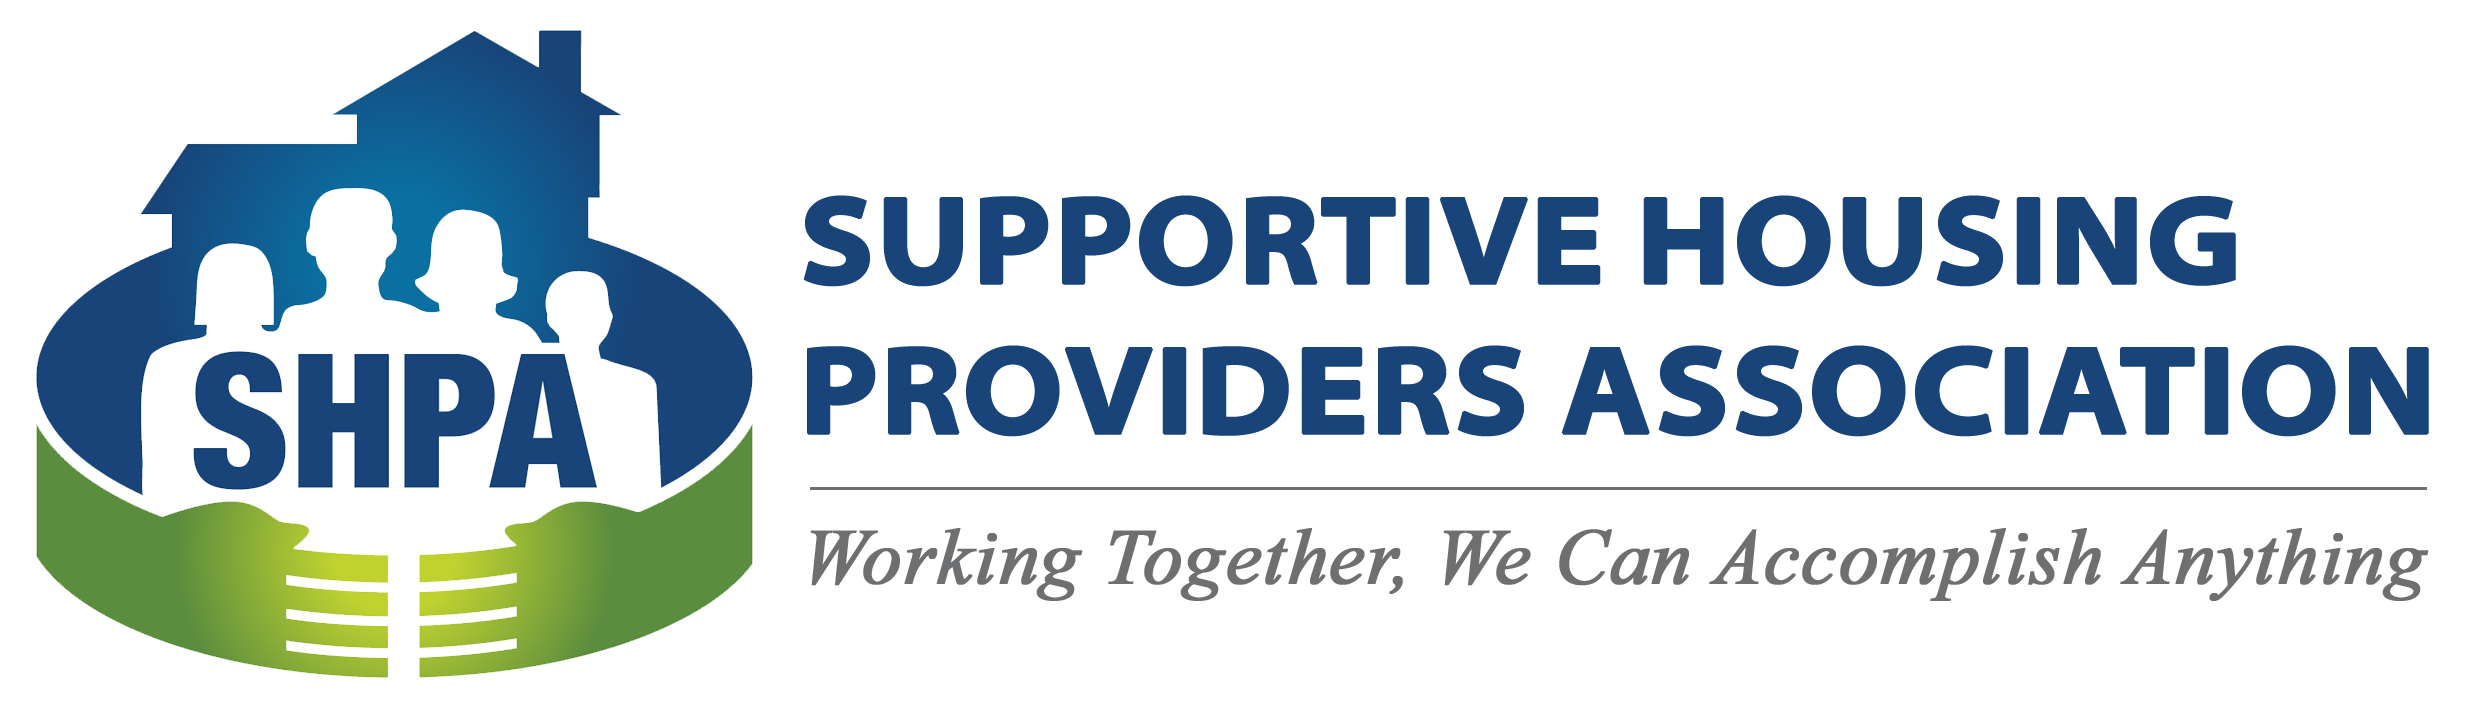 Supportive Housing Providers Association Logo